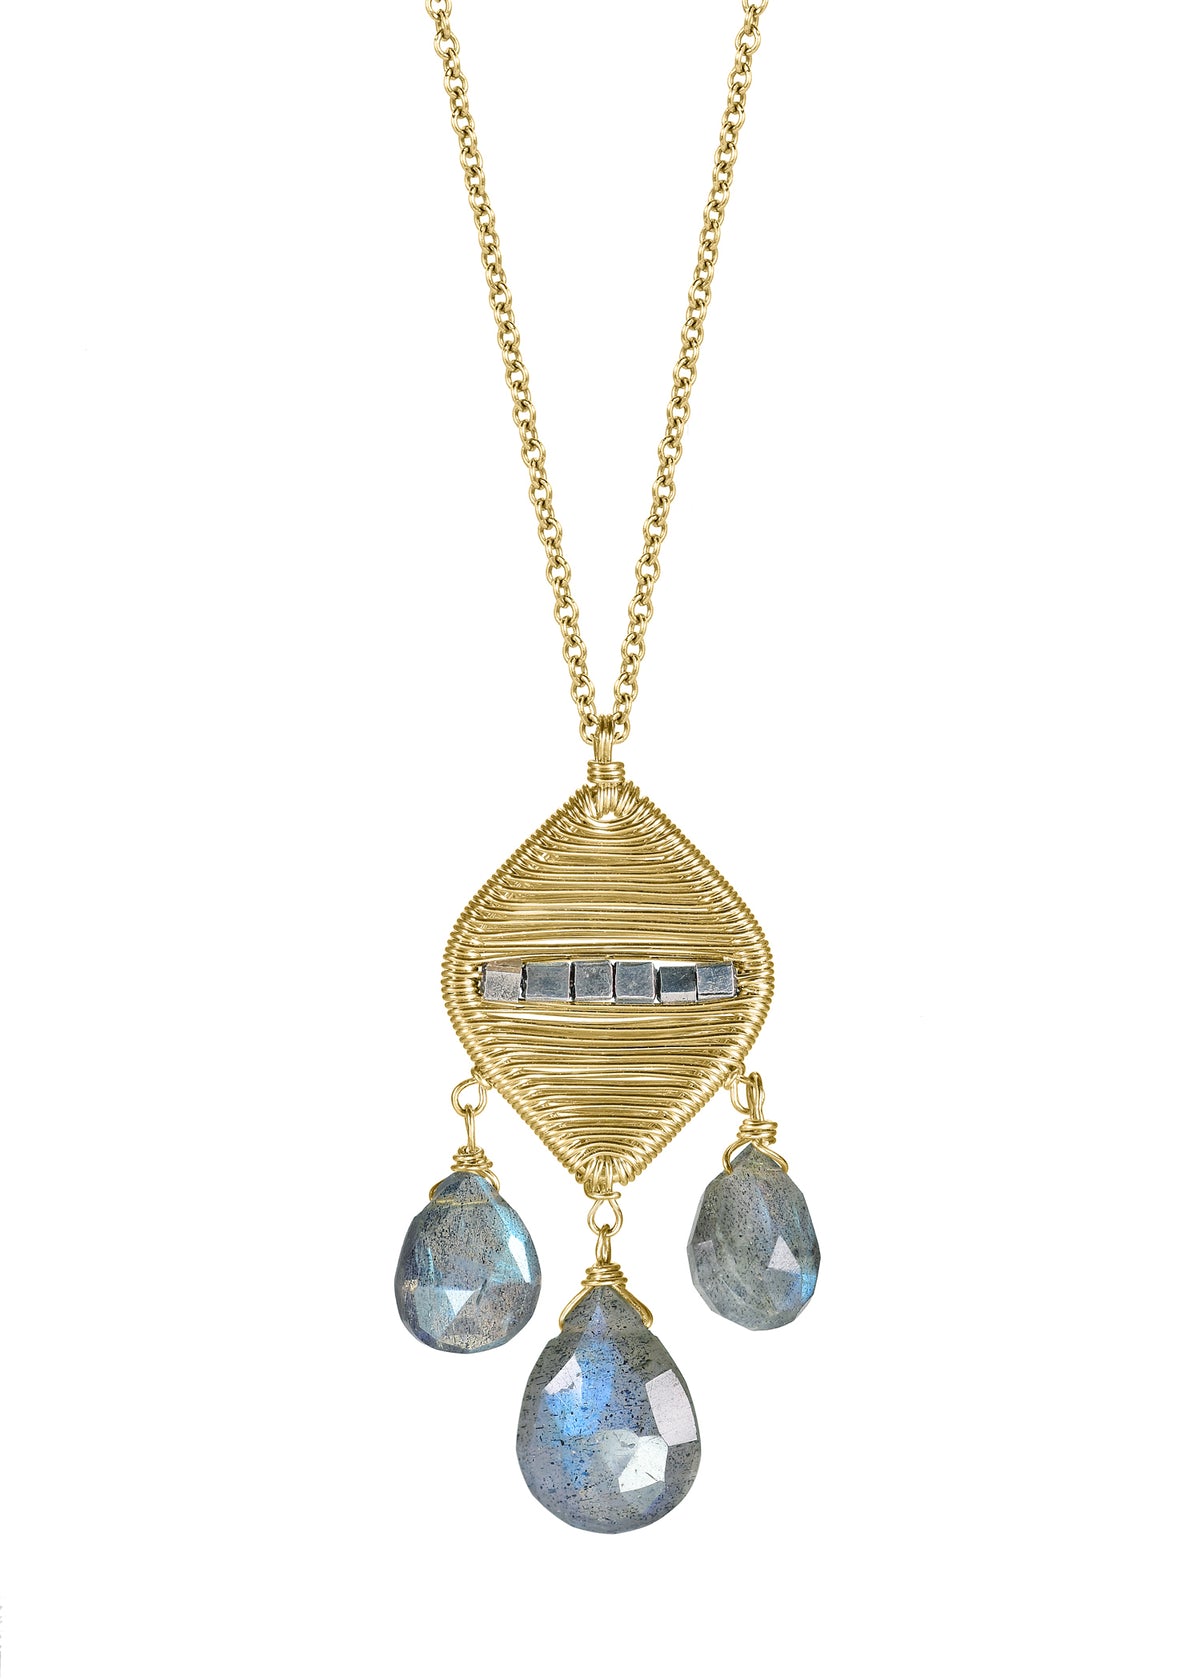 Labradorite 14k gold fill Sterling silver Mixed metal Necklace measures 16-1/2&quot; in length Pendant measures 1-1/4&quot; in length and 1/2&quot; in width at the widest point Handmade in our Los Angeles studio